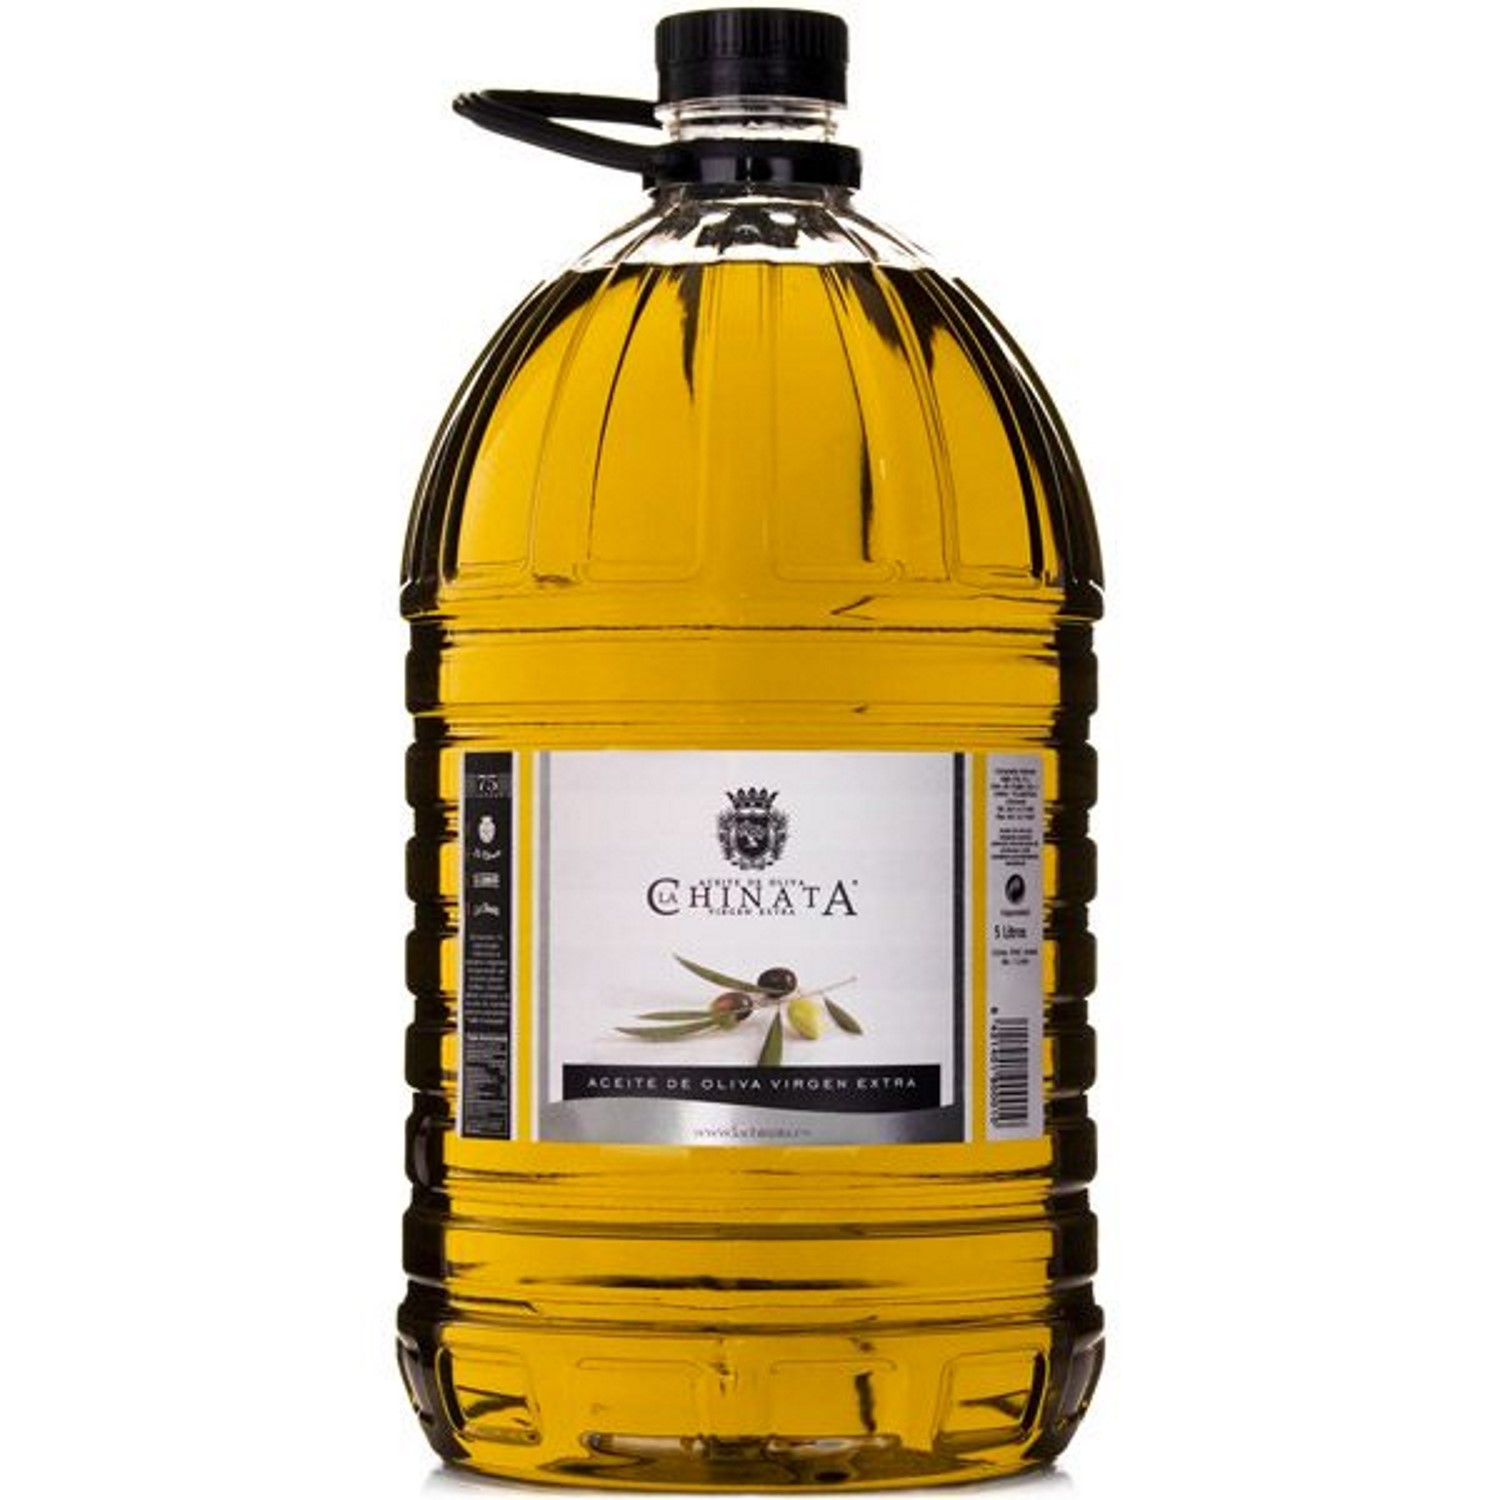 Оливковое масло cratos extra. Olive Oil 5l package. Масло 5 литров. Оливковое масло Chinata. Оливковое масло 5л.